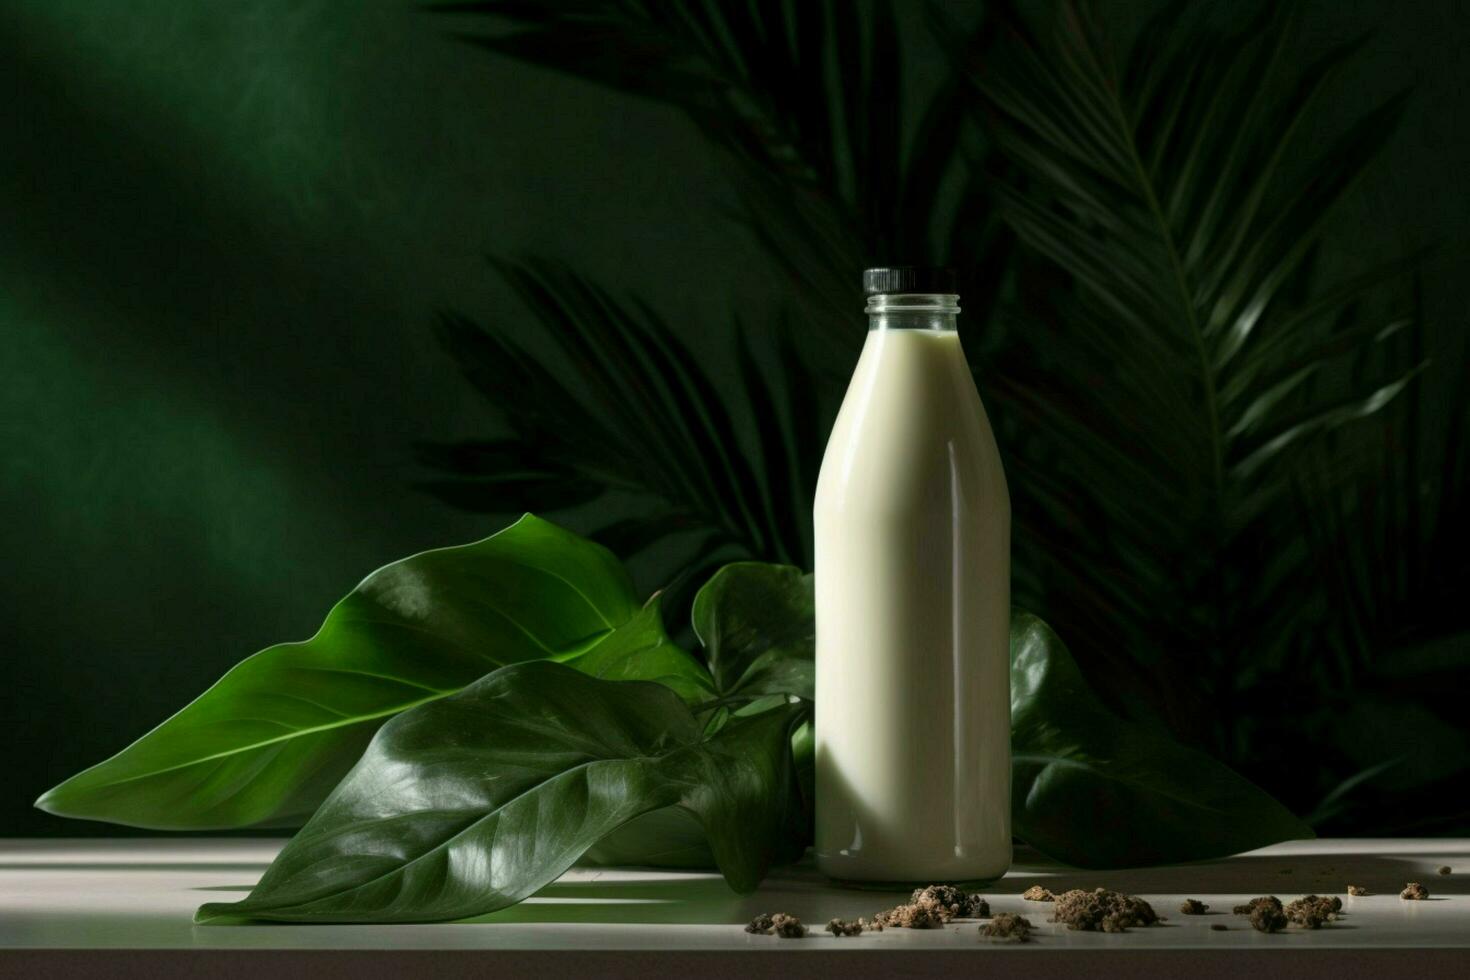 a bottle of milk with a black cap sits on a table photo